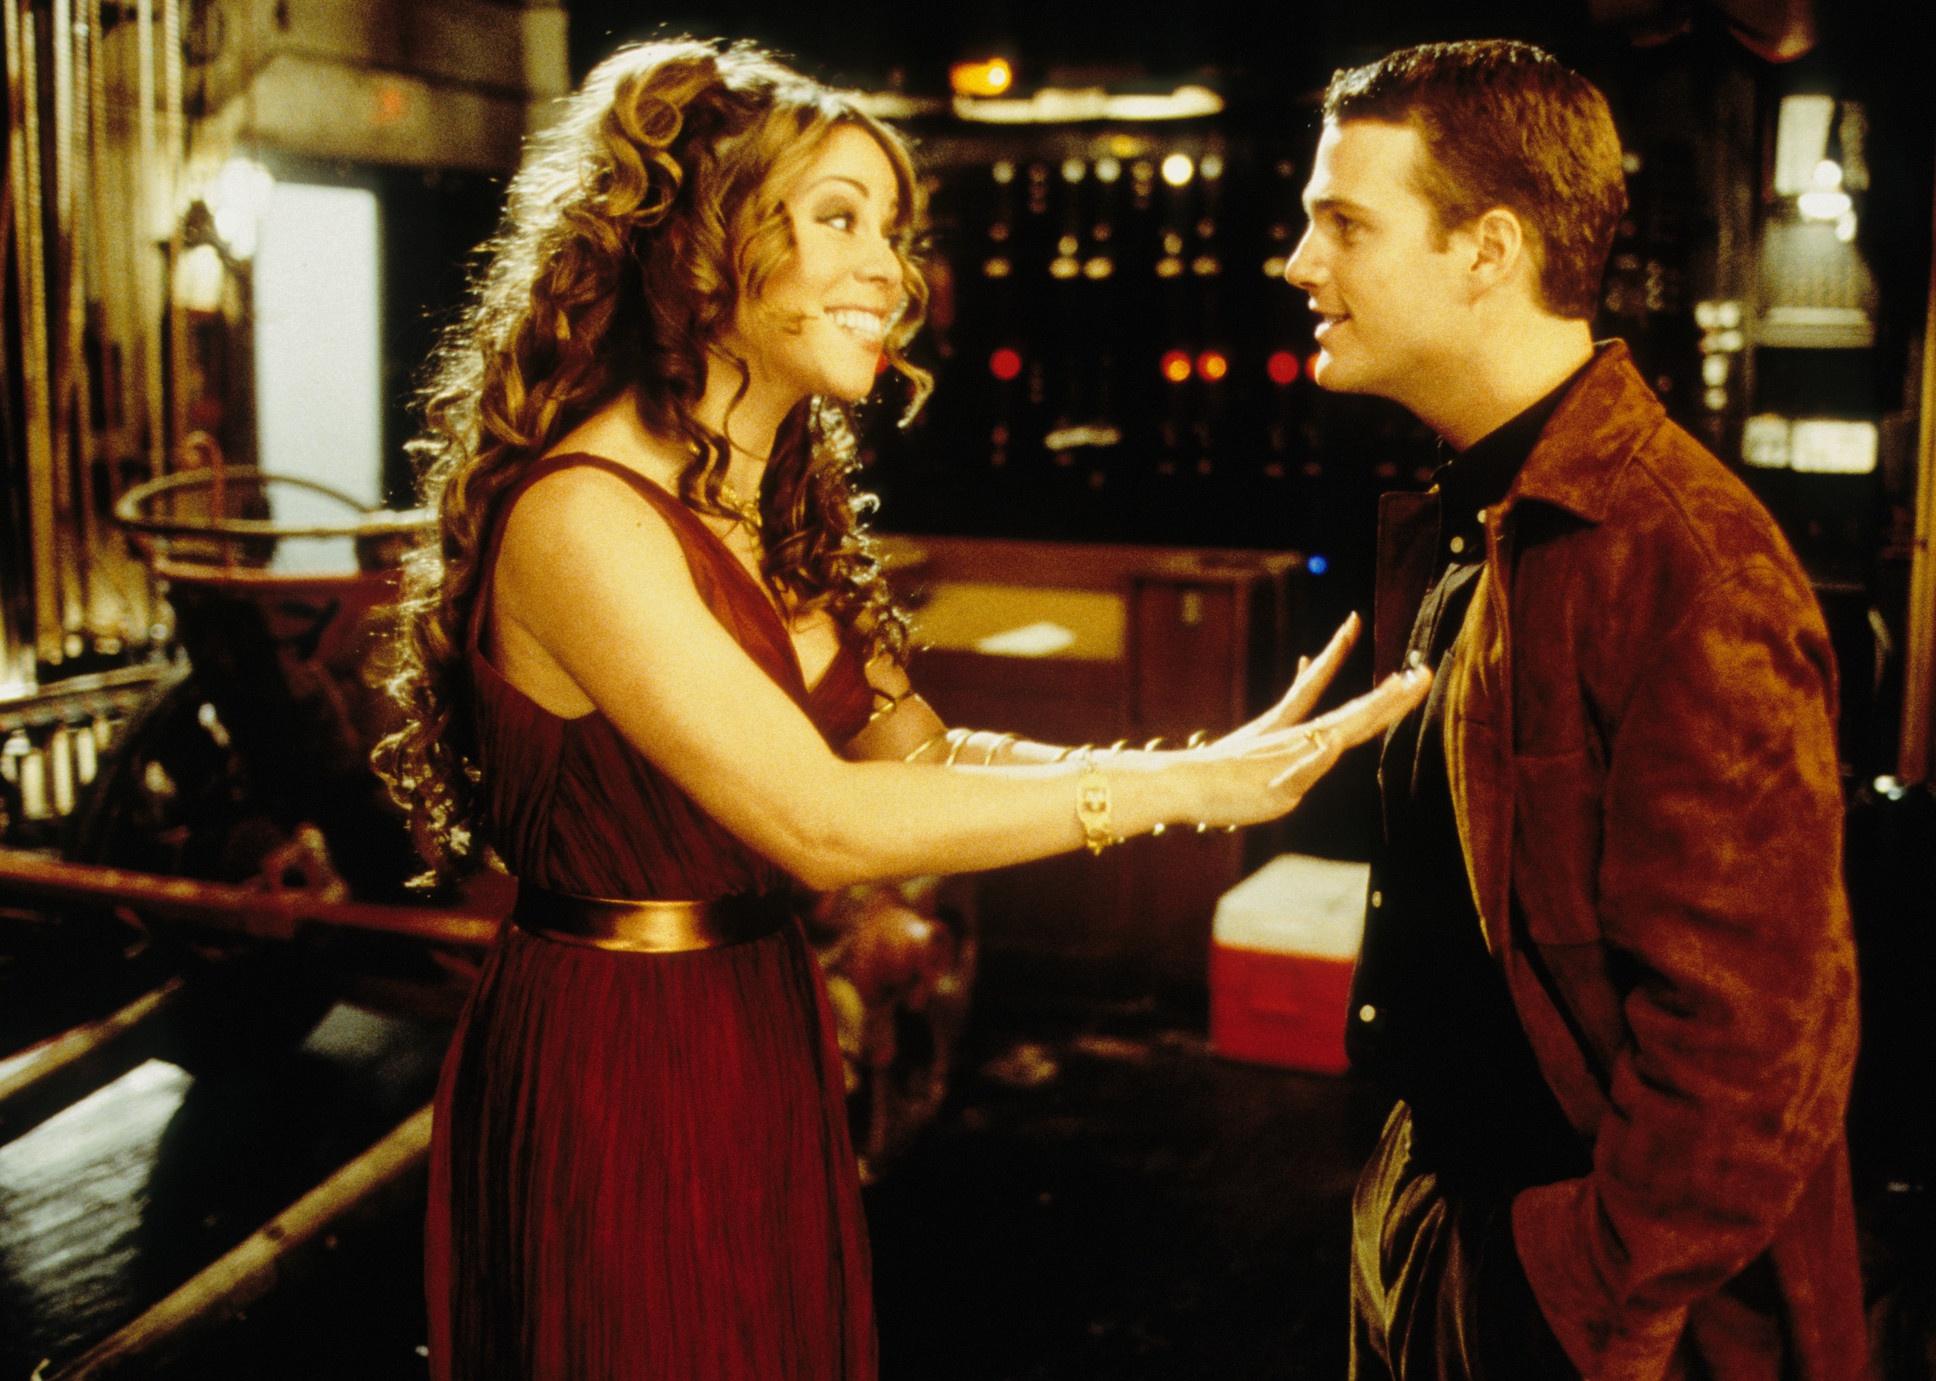 Chris O'Donnell and Mariah Carey talking and smiling.